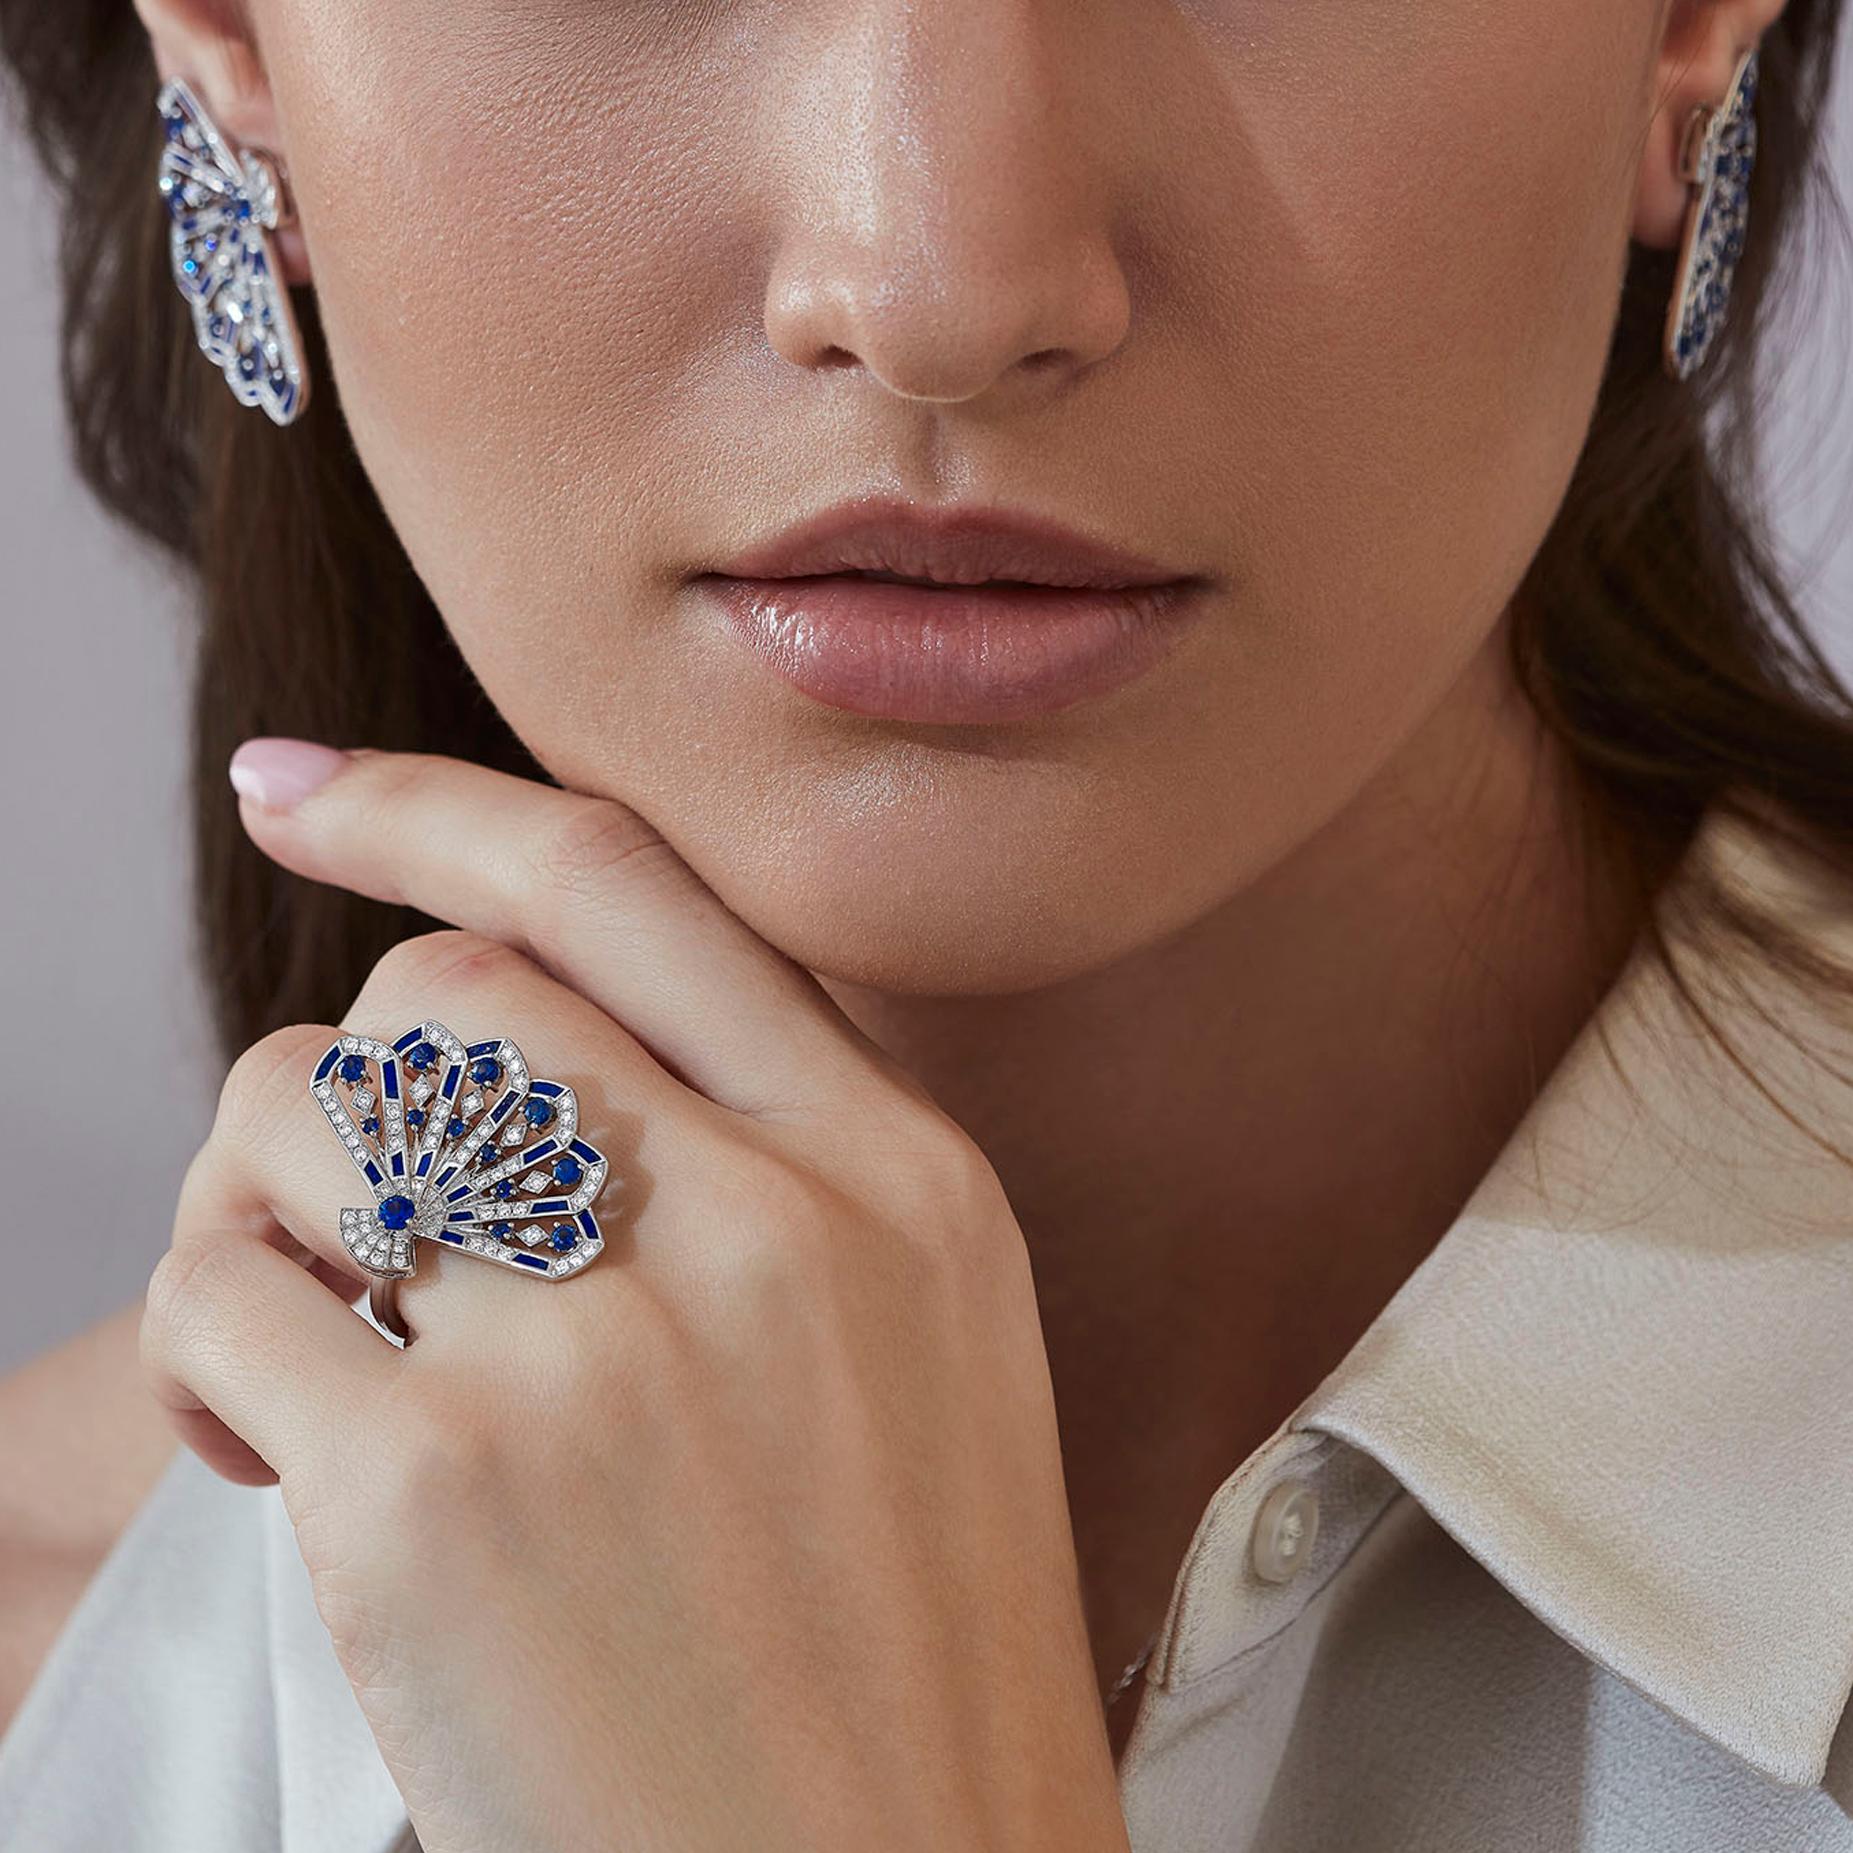 A House of Garrard 18 karat white gold 'Fanfare Symphony' ring, set with round blue sapphires, round white diamonds and lapis lazuli inlay. 

13 round blue sapphires
73 round white diamonds
19 pieces of lapis lazuli inlay
Size 54

Please note rings